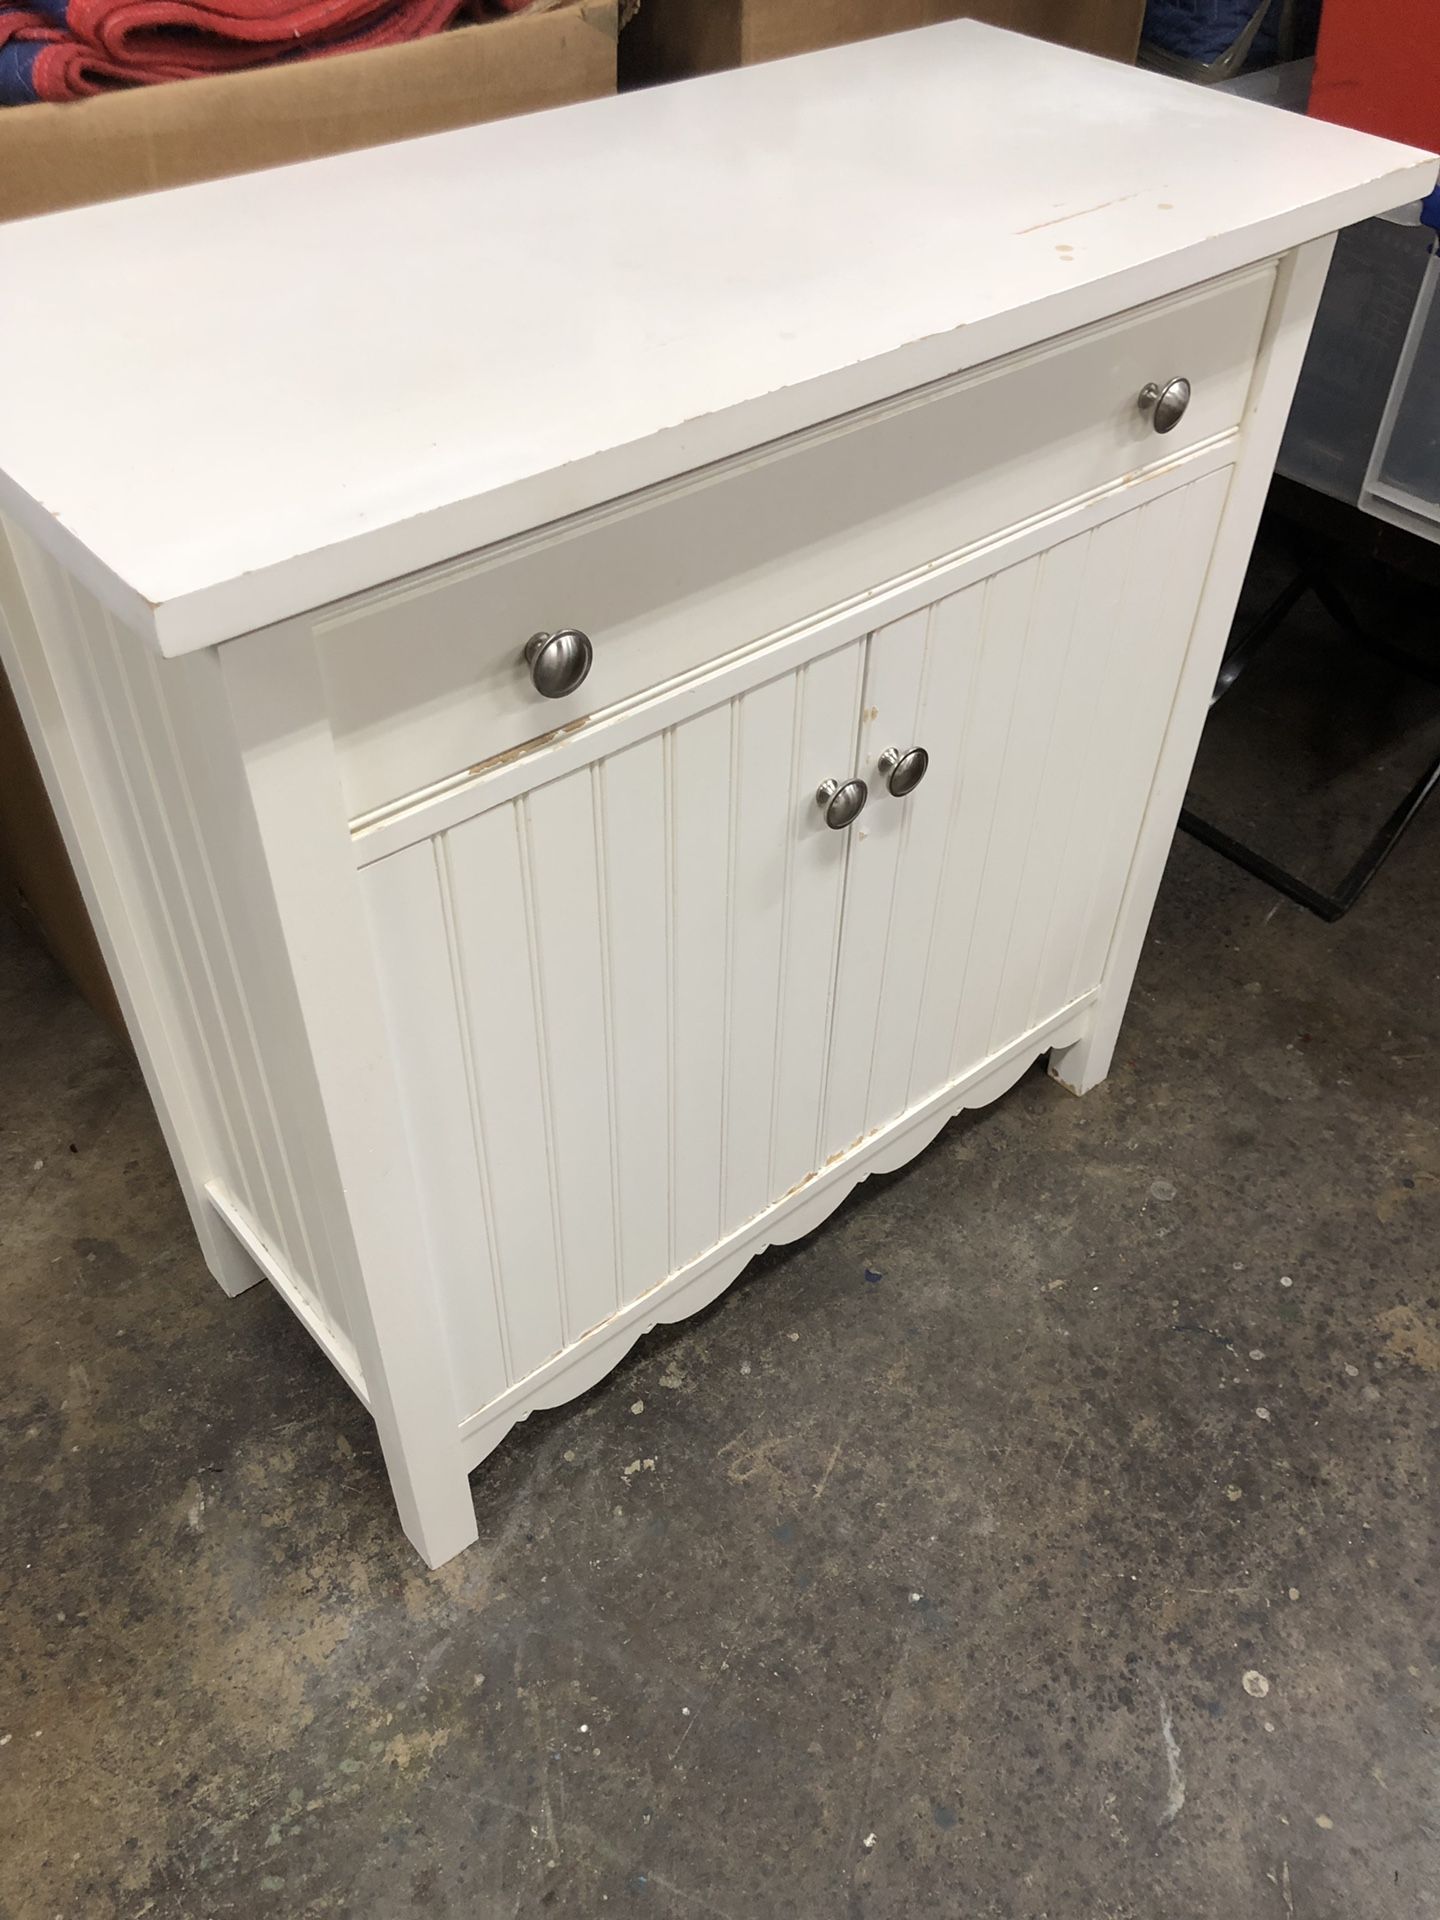 Small kitchen or bathroom table / cabinet